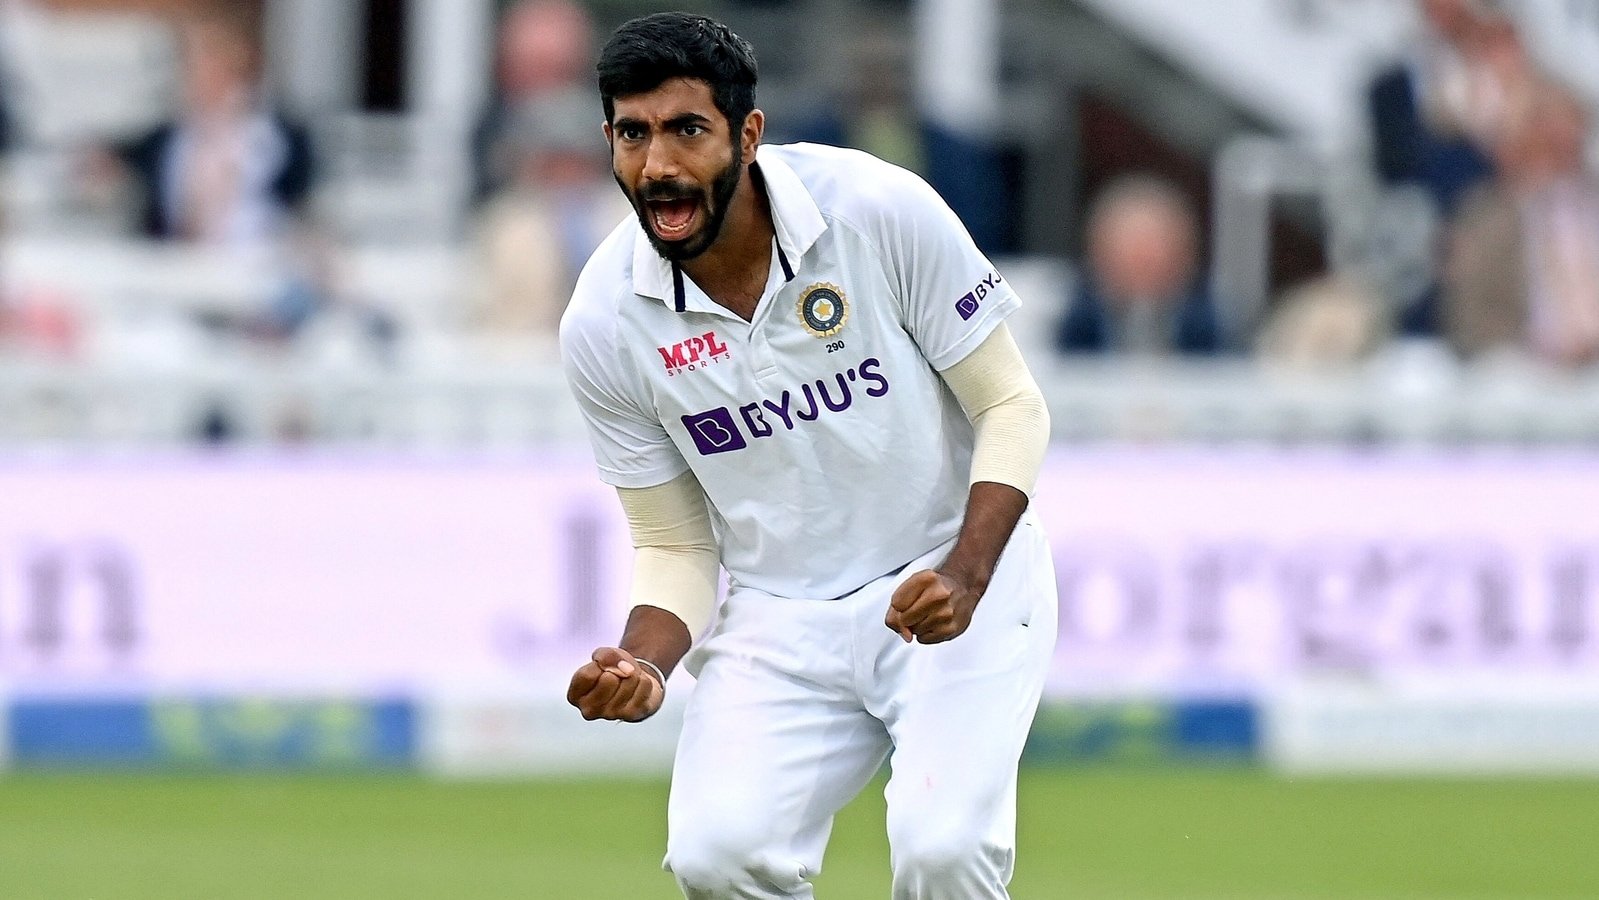 IND vs ENG: “We Do Have To Score Runs Off Him” – Ben Stokes On Jasprit Bumrah